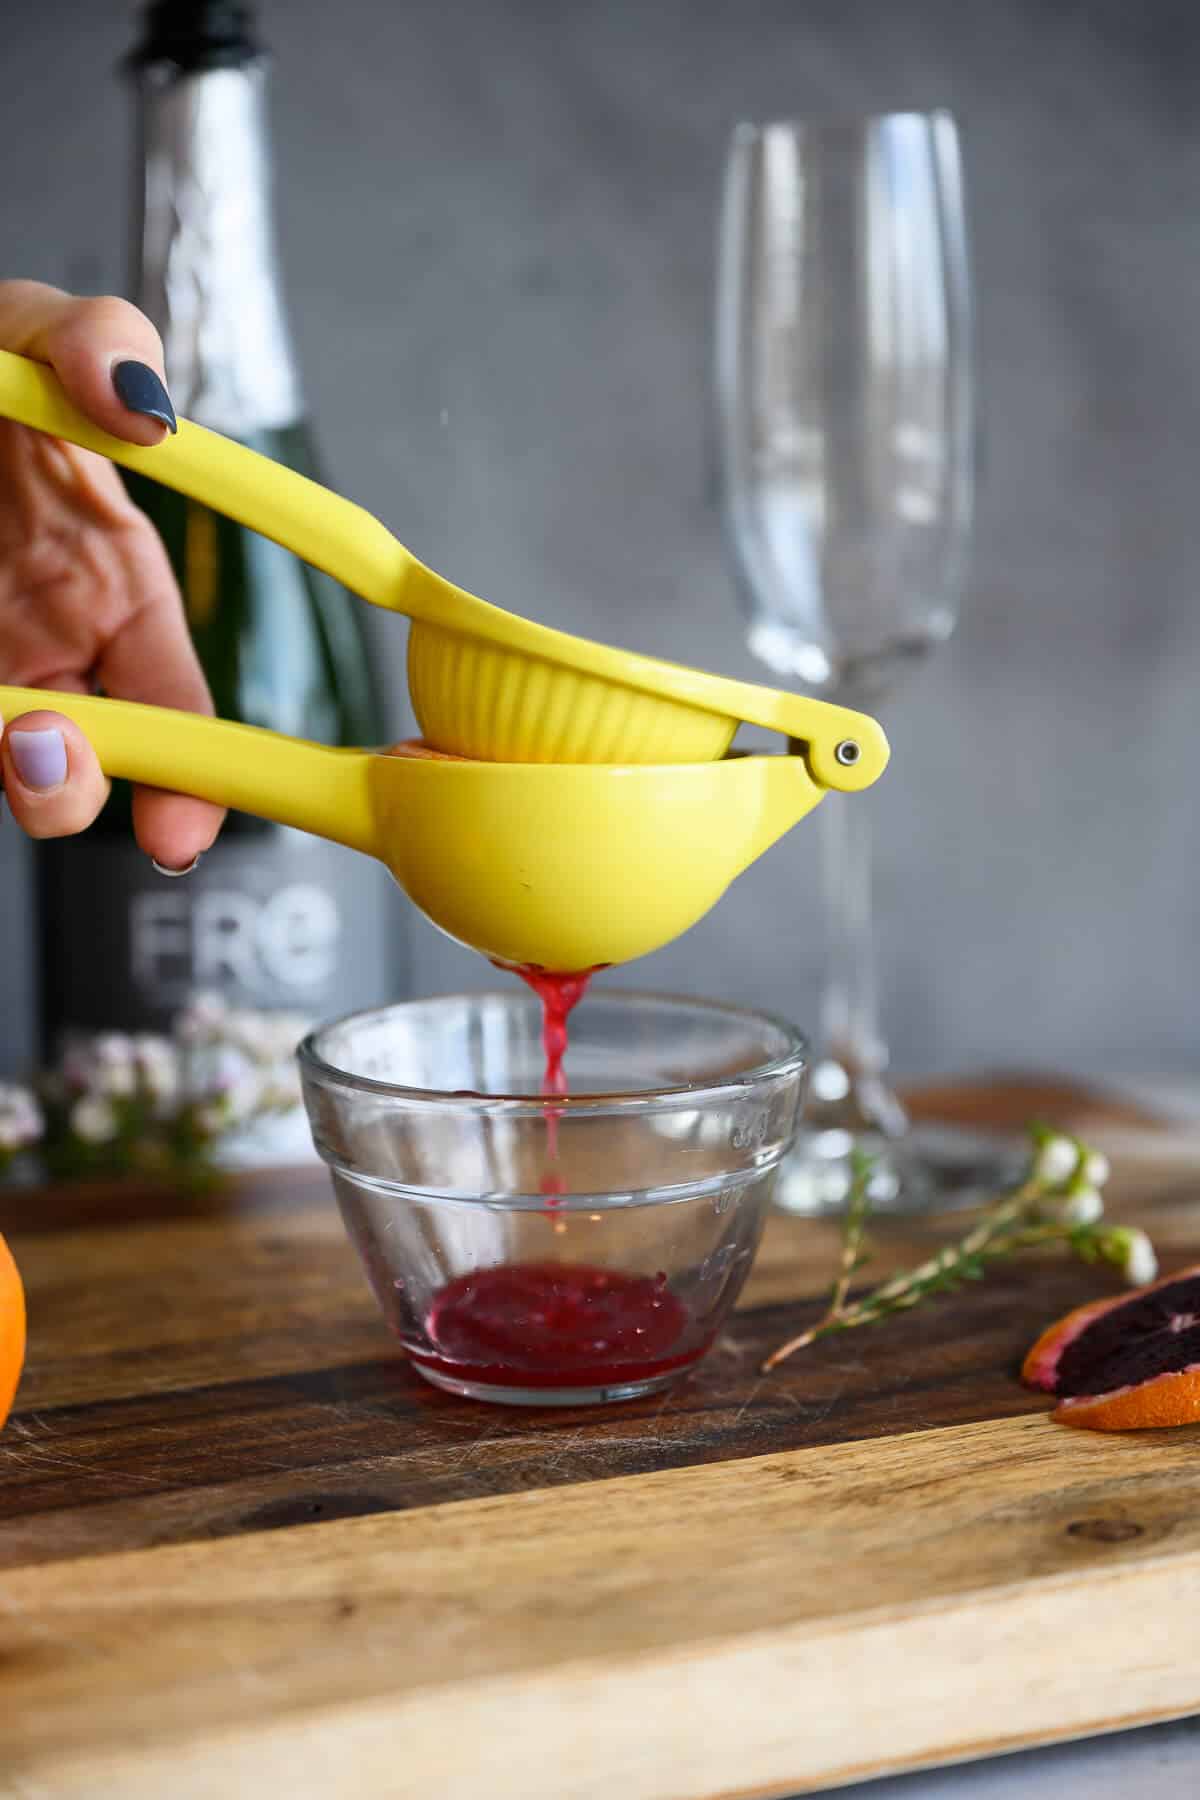 juice from blood oranges being squeezed through citrus juicer